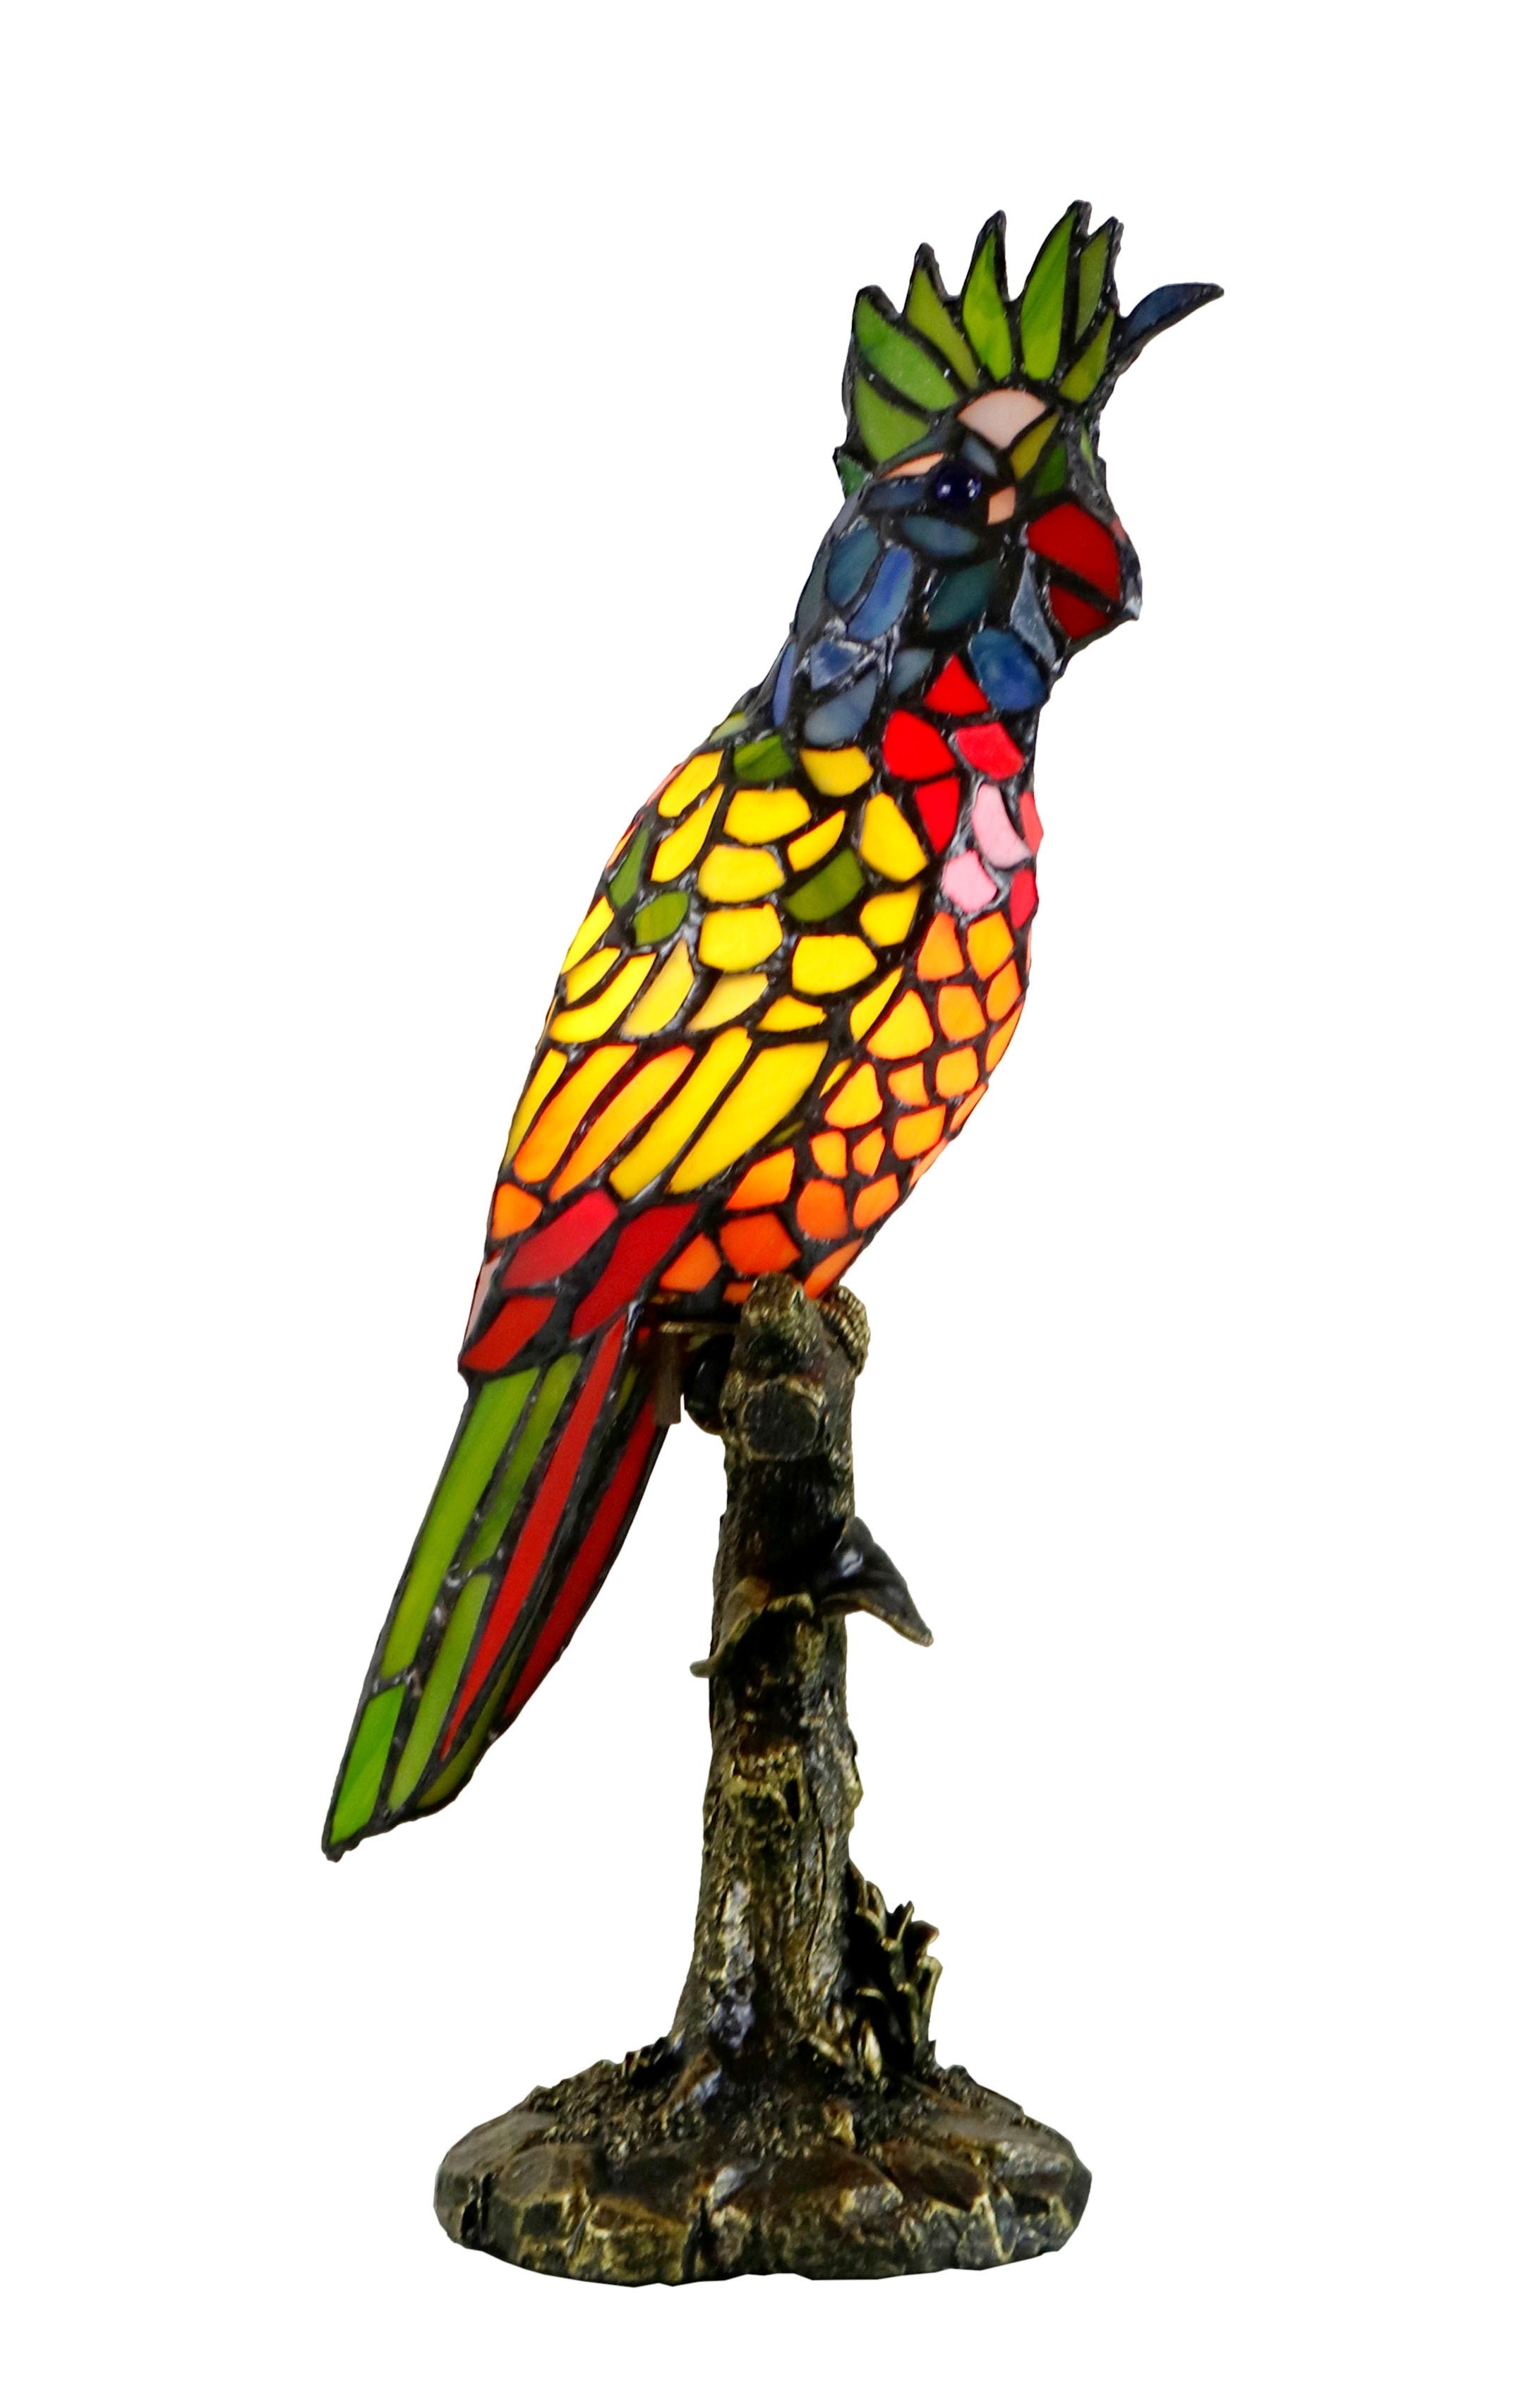 Cockatoo Tiffany Style Stained Glass Statue Table Lamp